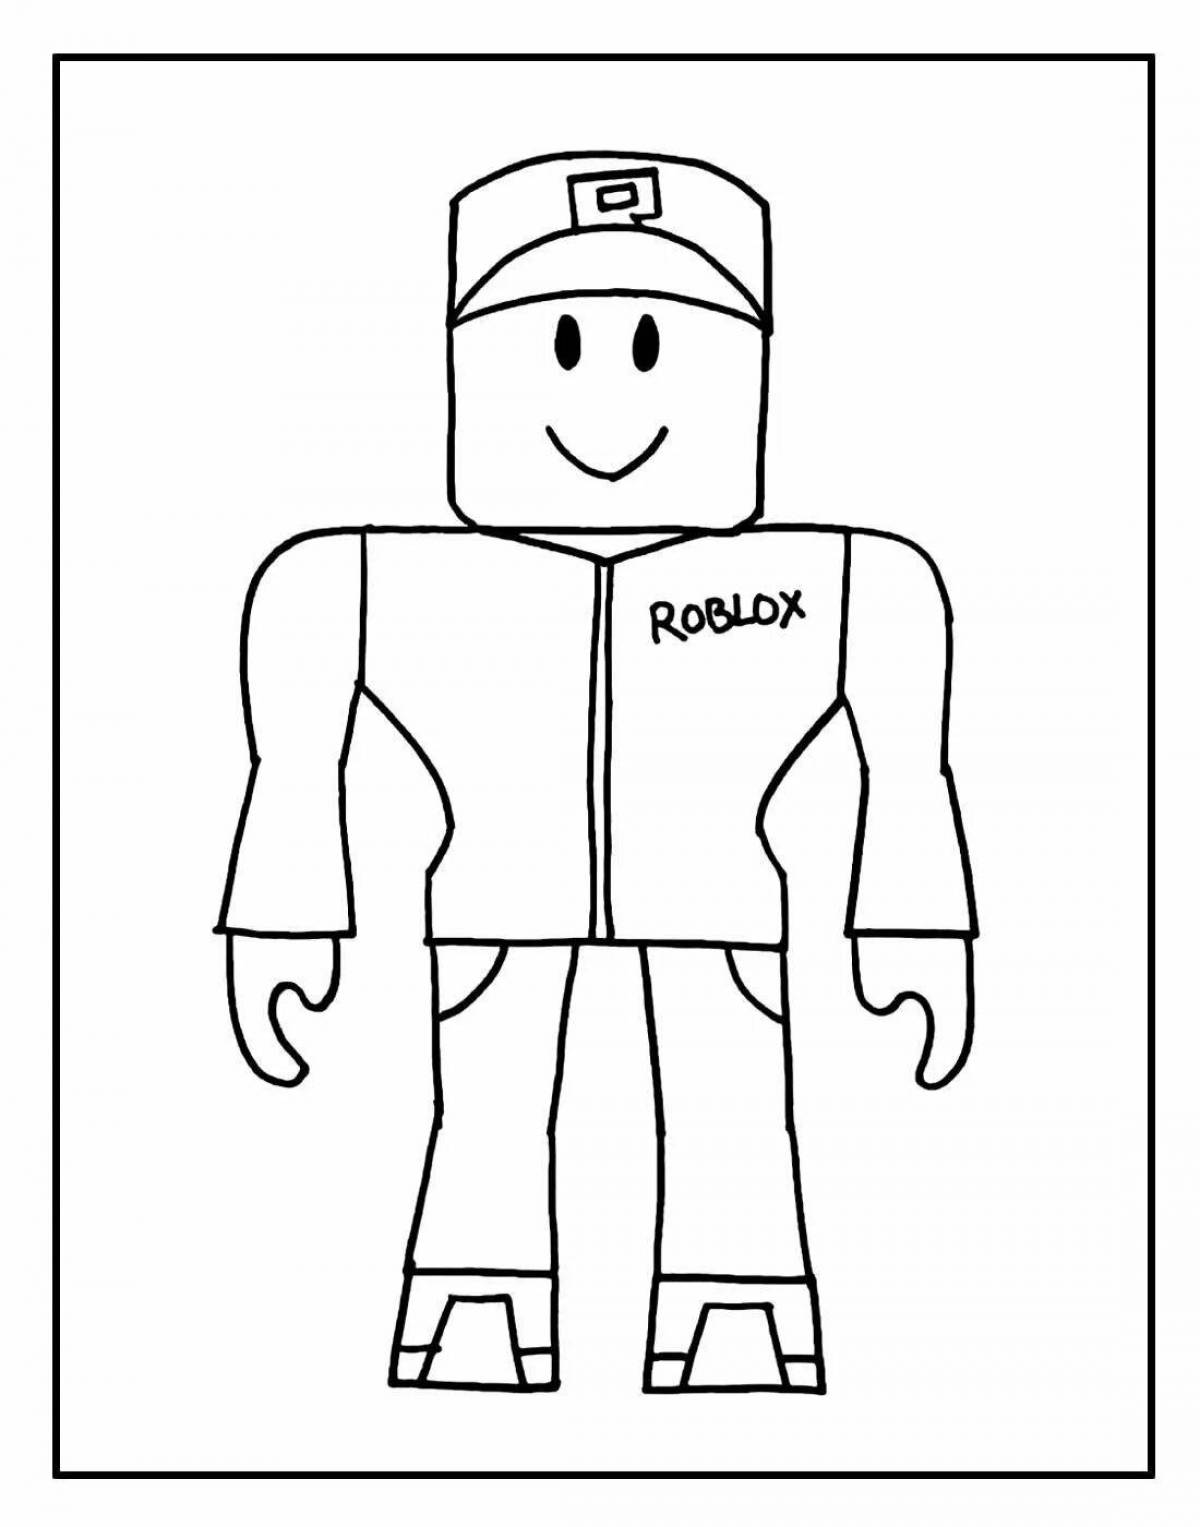 Roblox people girls coloring book